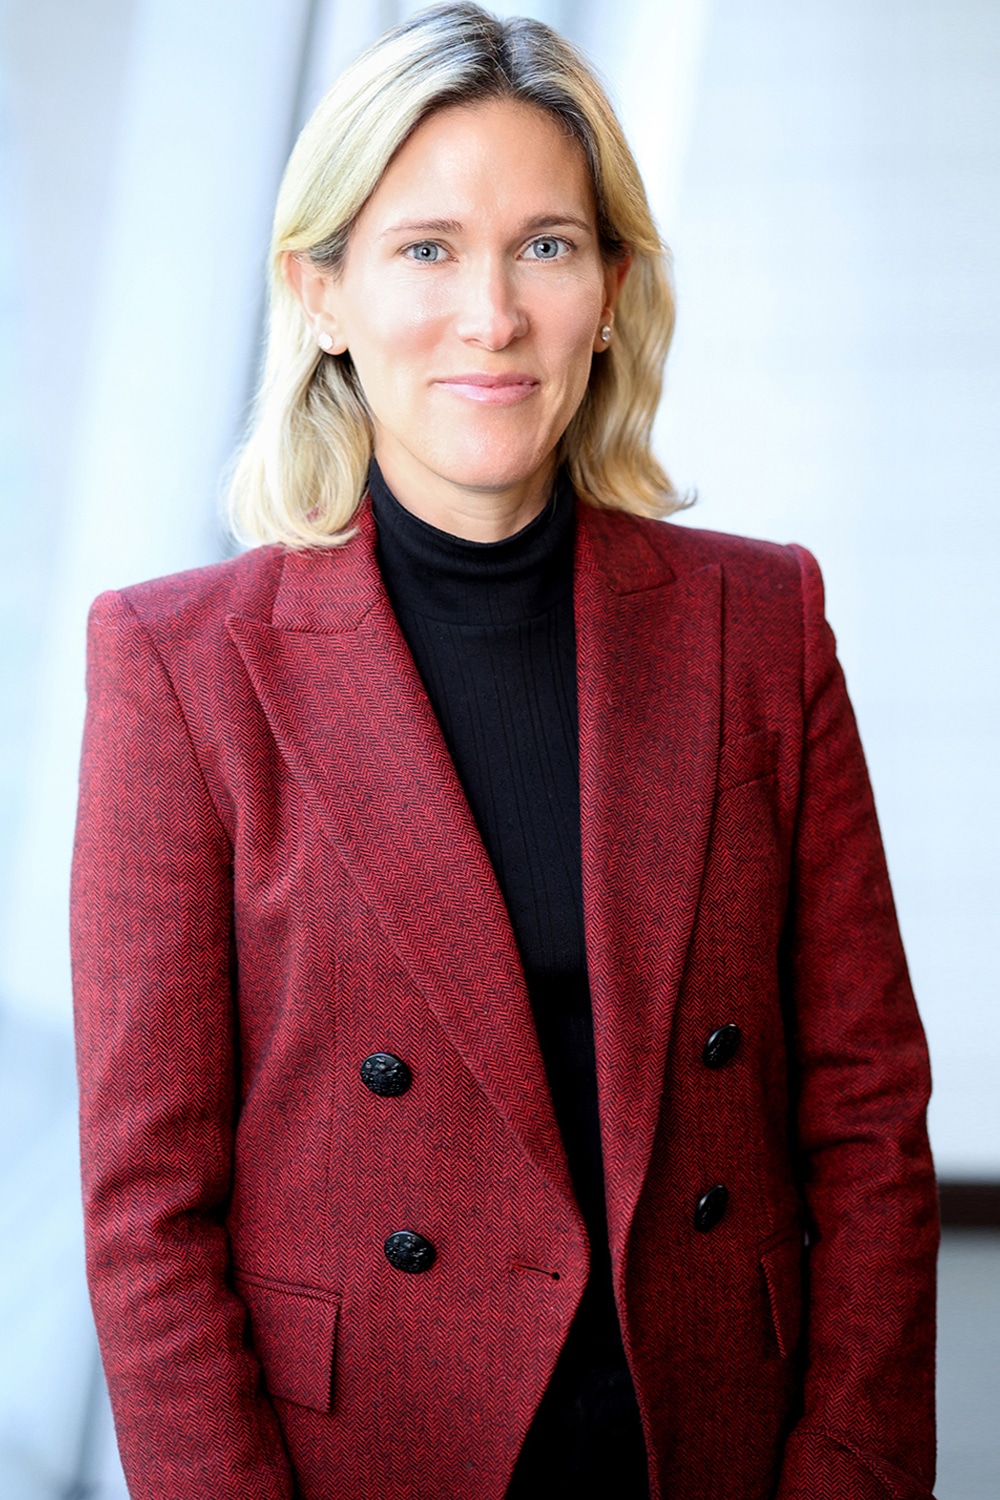 A professional woman sporting a red blazer and black turtleneck for headshots in NYC.